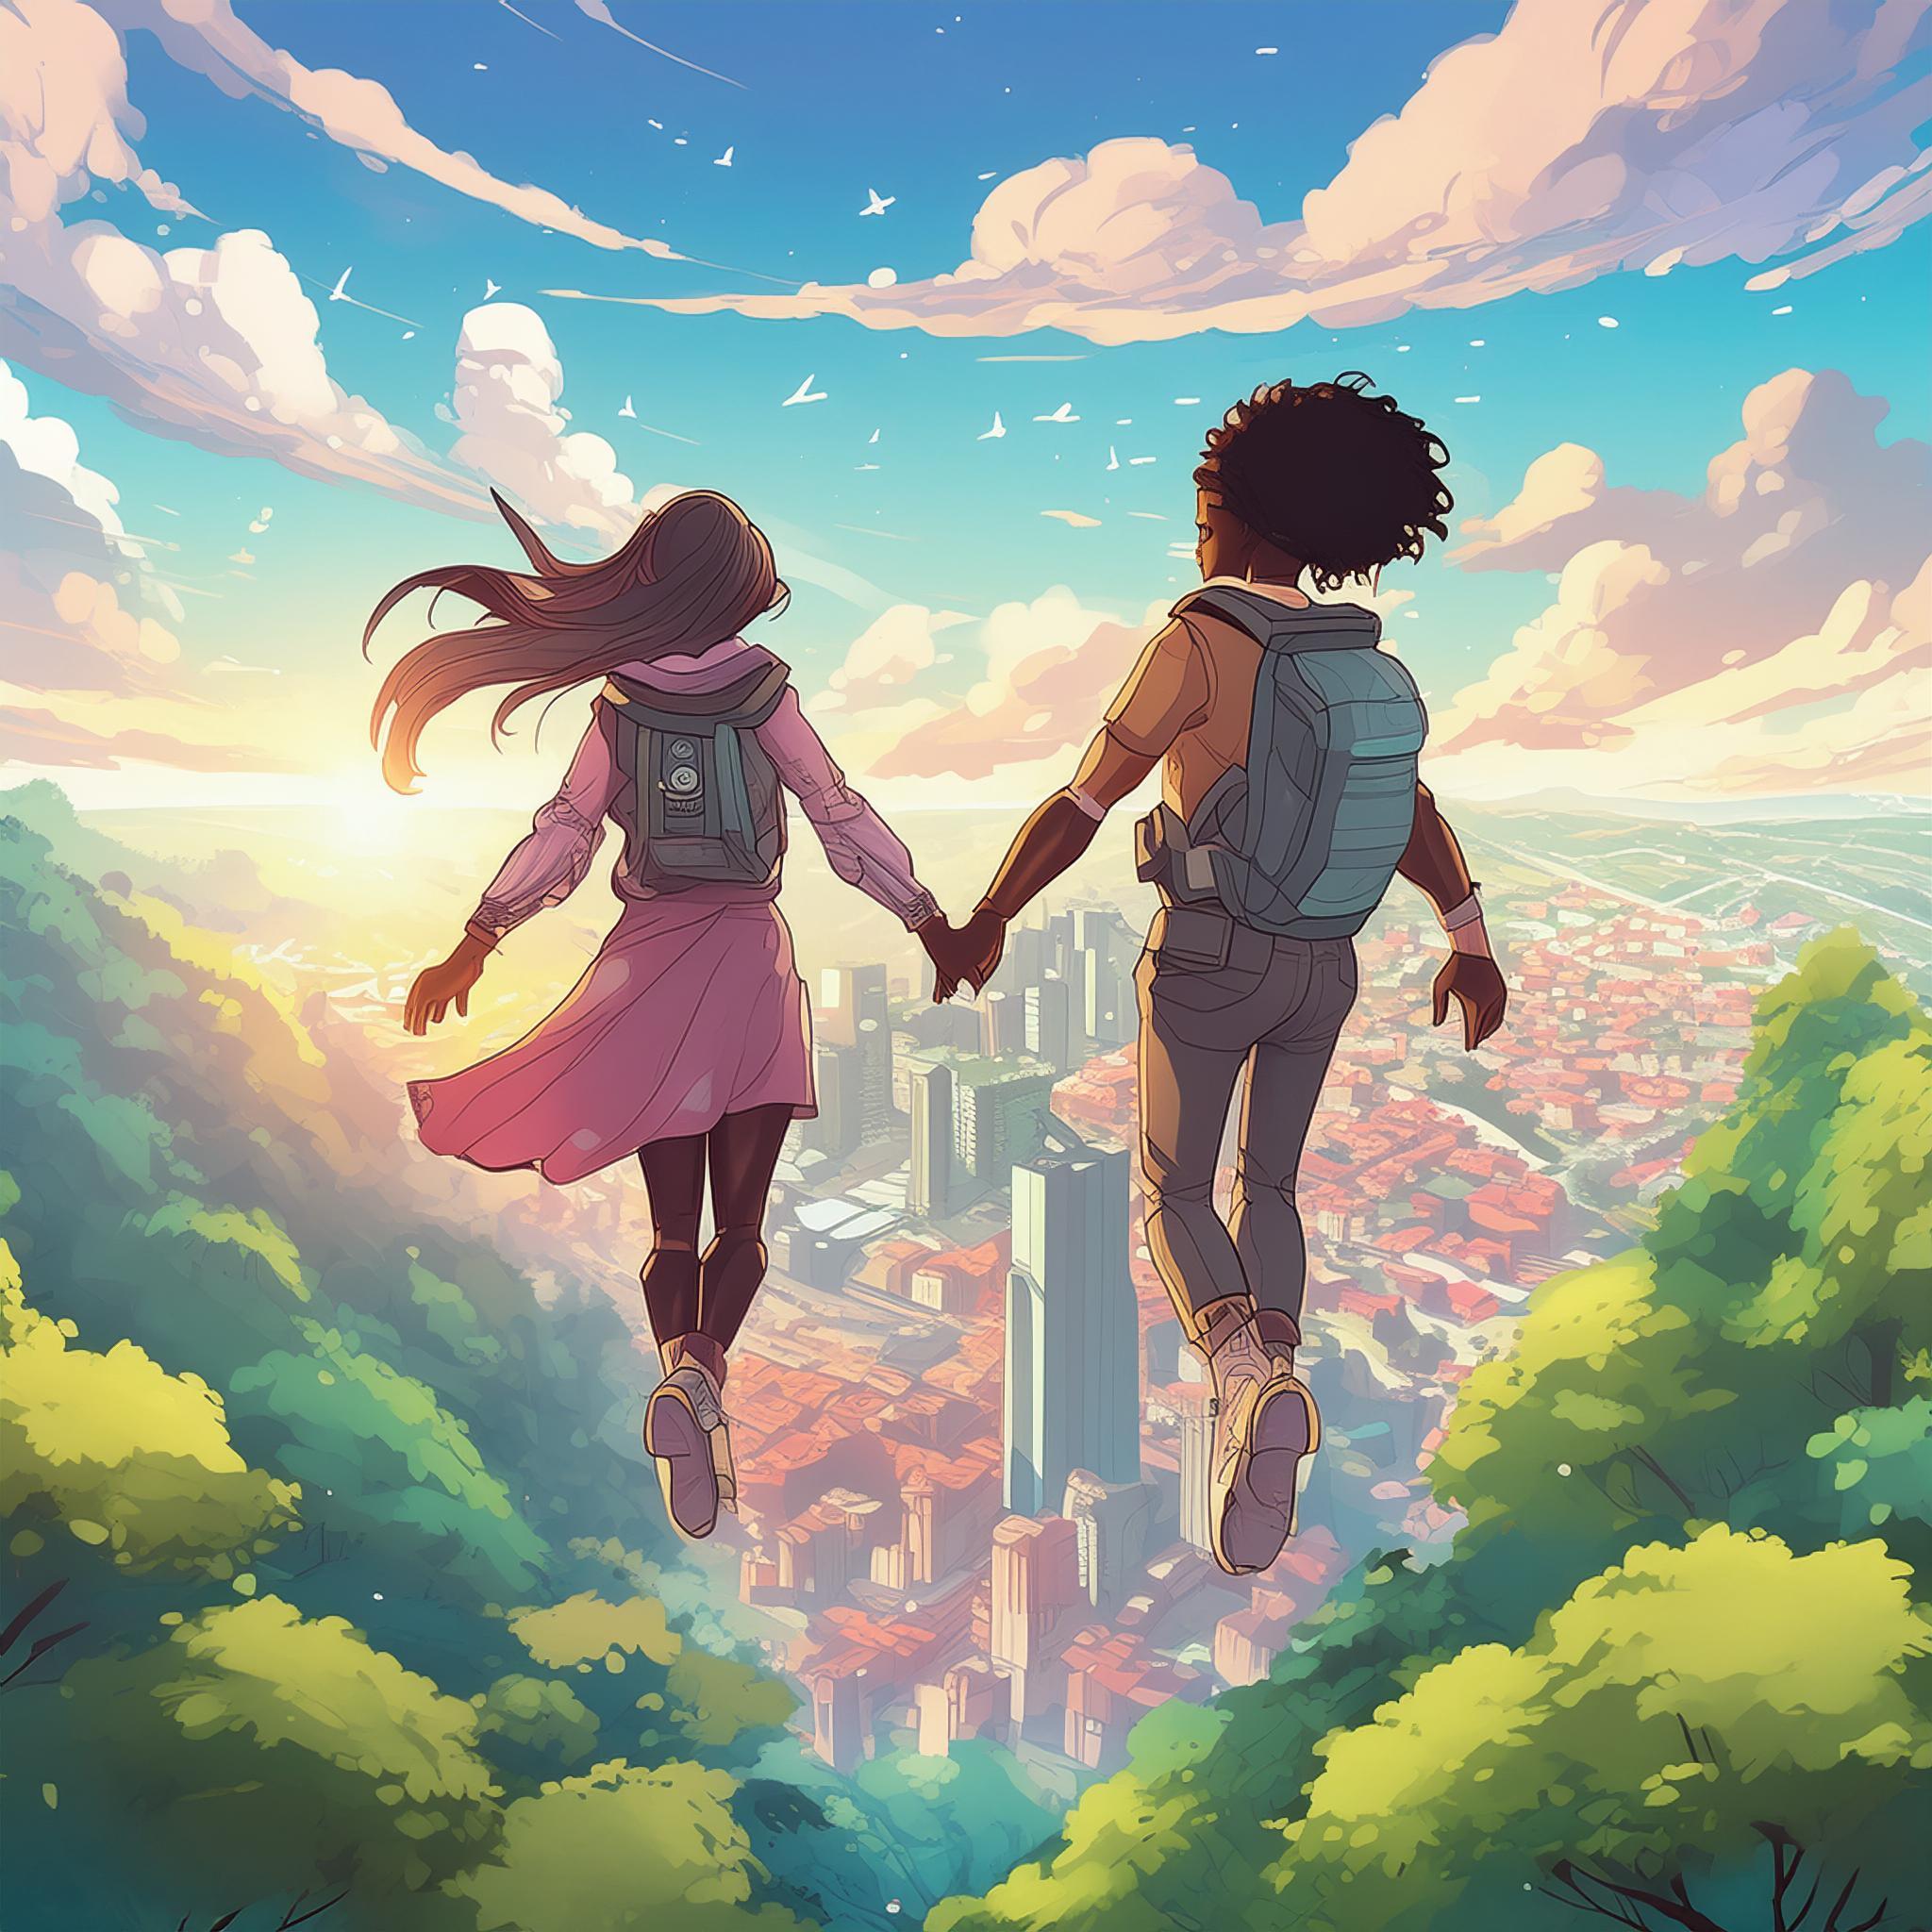 anime style image of two people holding hands, flying over forest and city